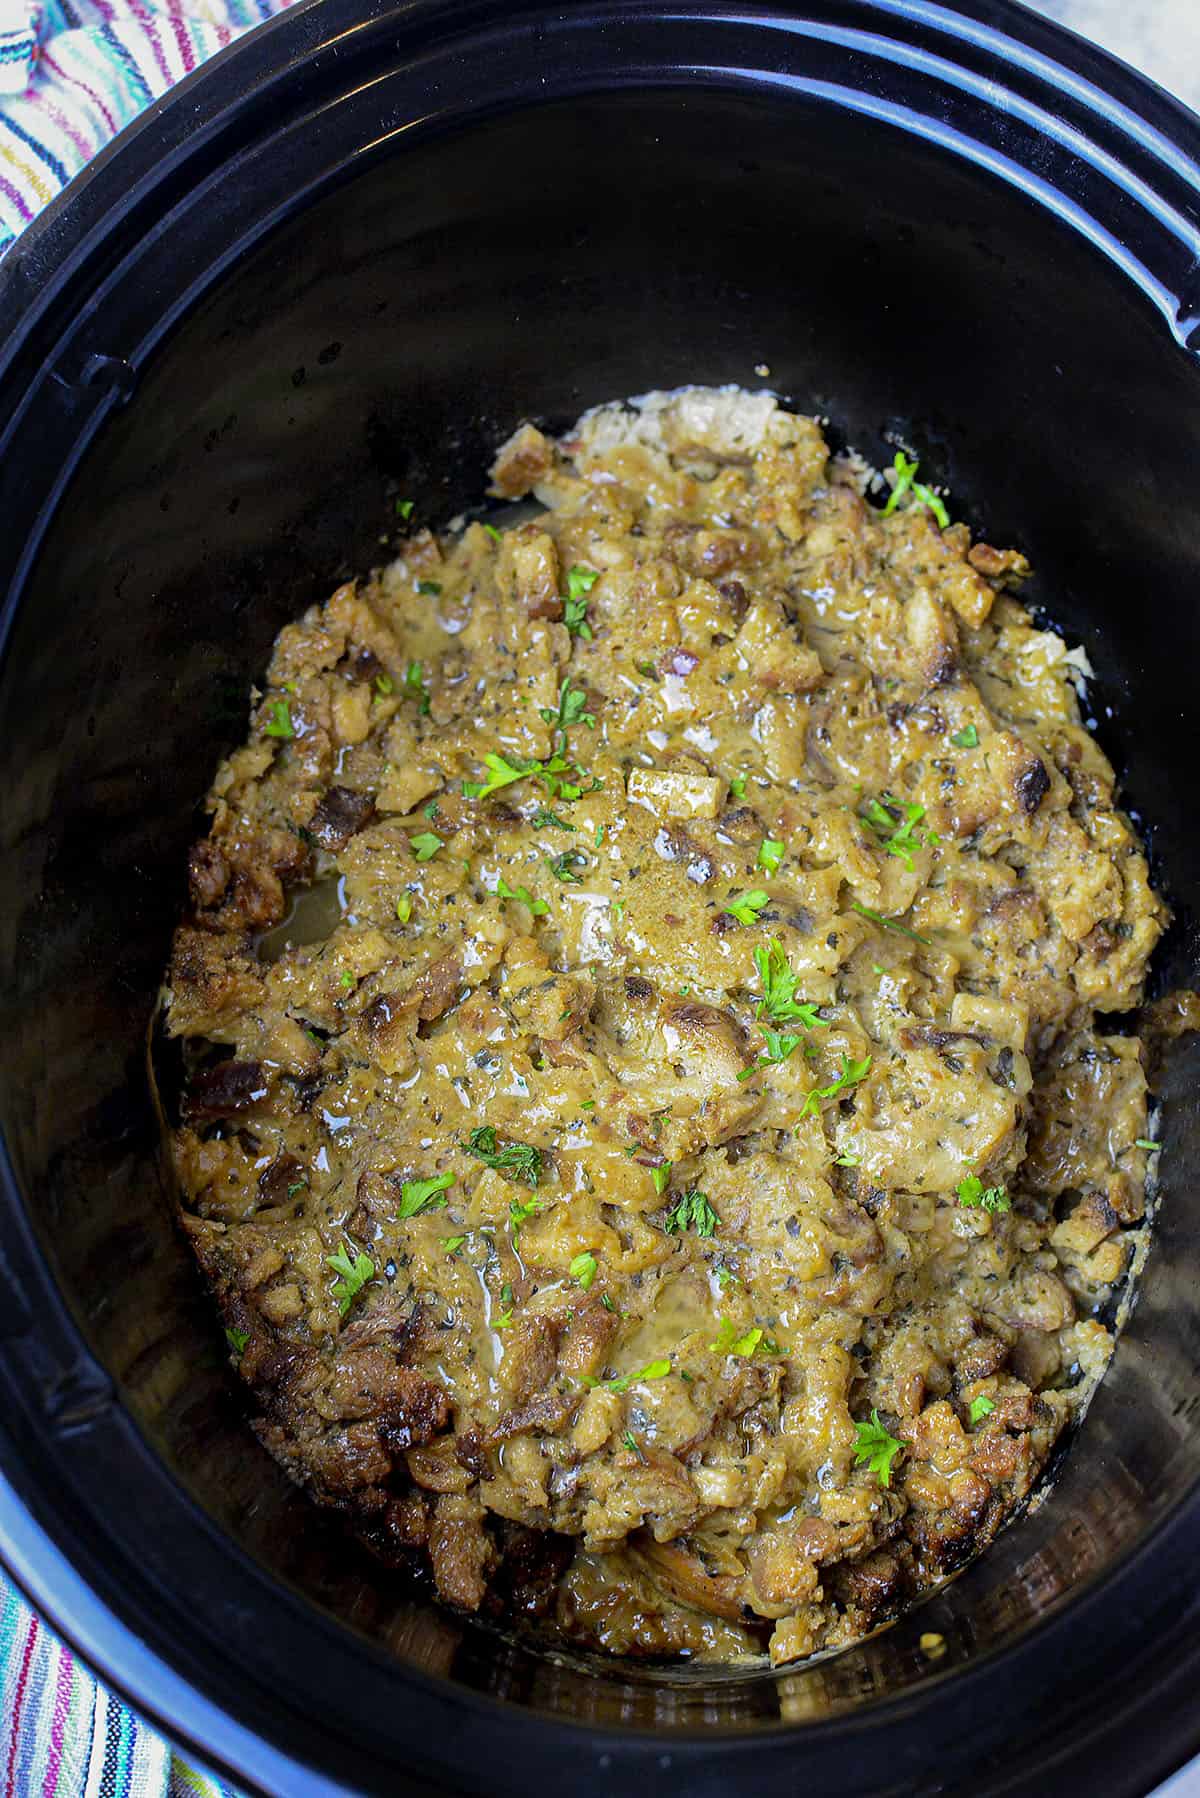 The entire chicken dish in the slow cooker, photographed from above in a black slow cooker.